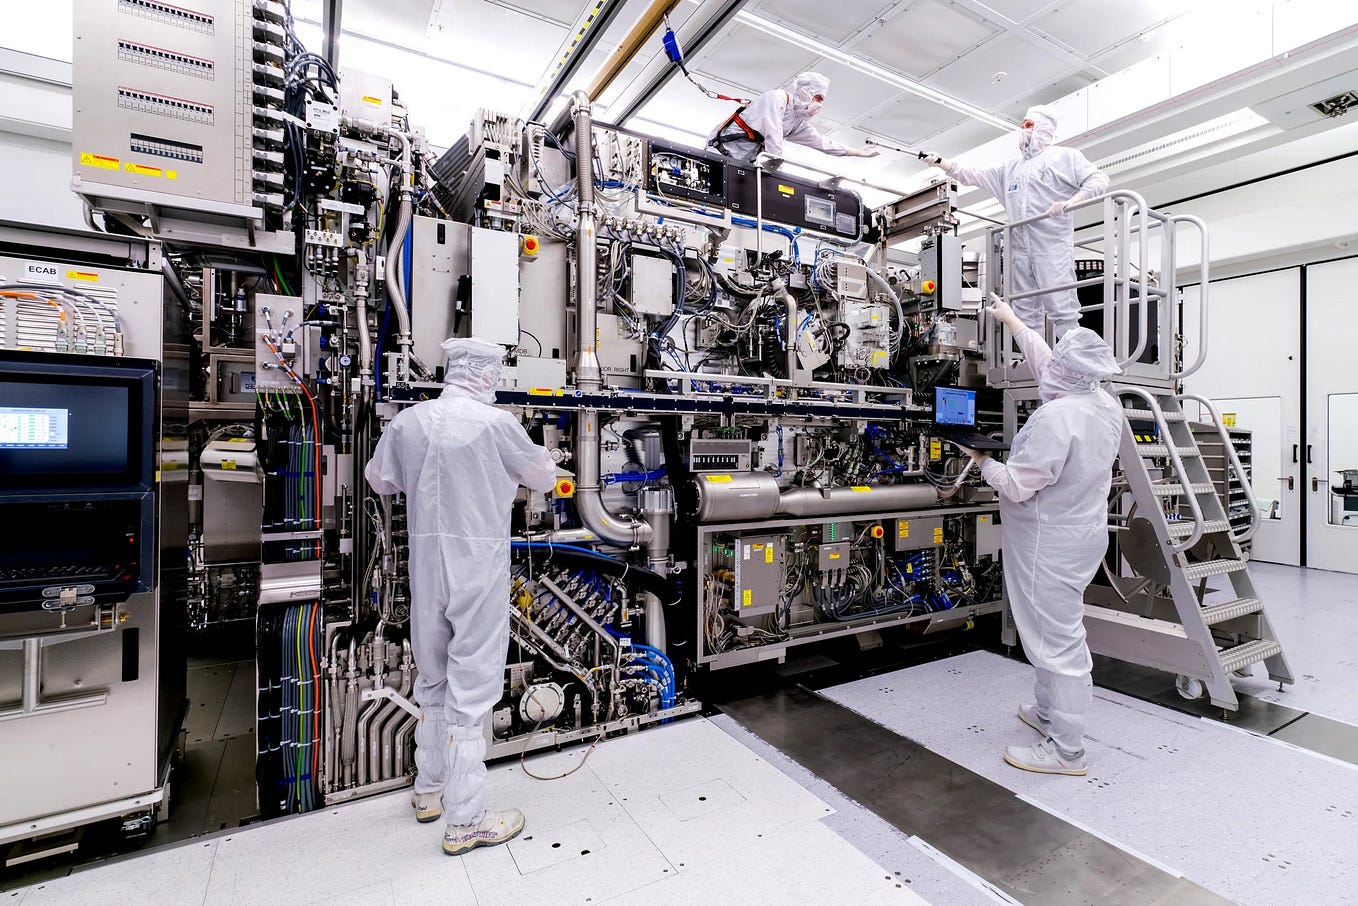 Four people constructing an immensely complicated machine. They are wearing white body suits to prevent dust from getting into the machine.